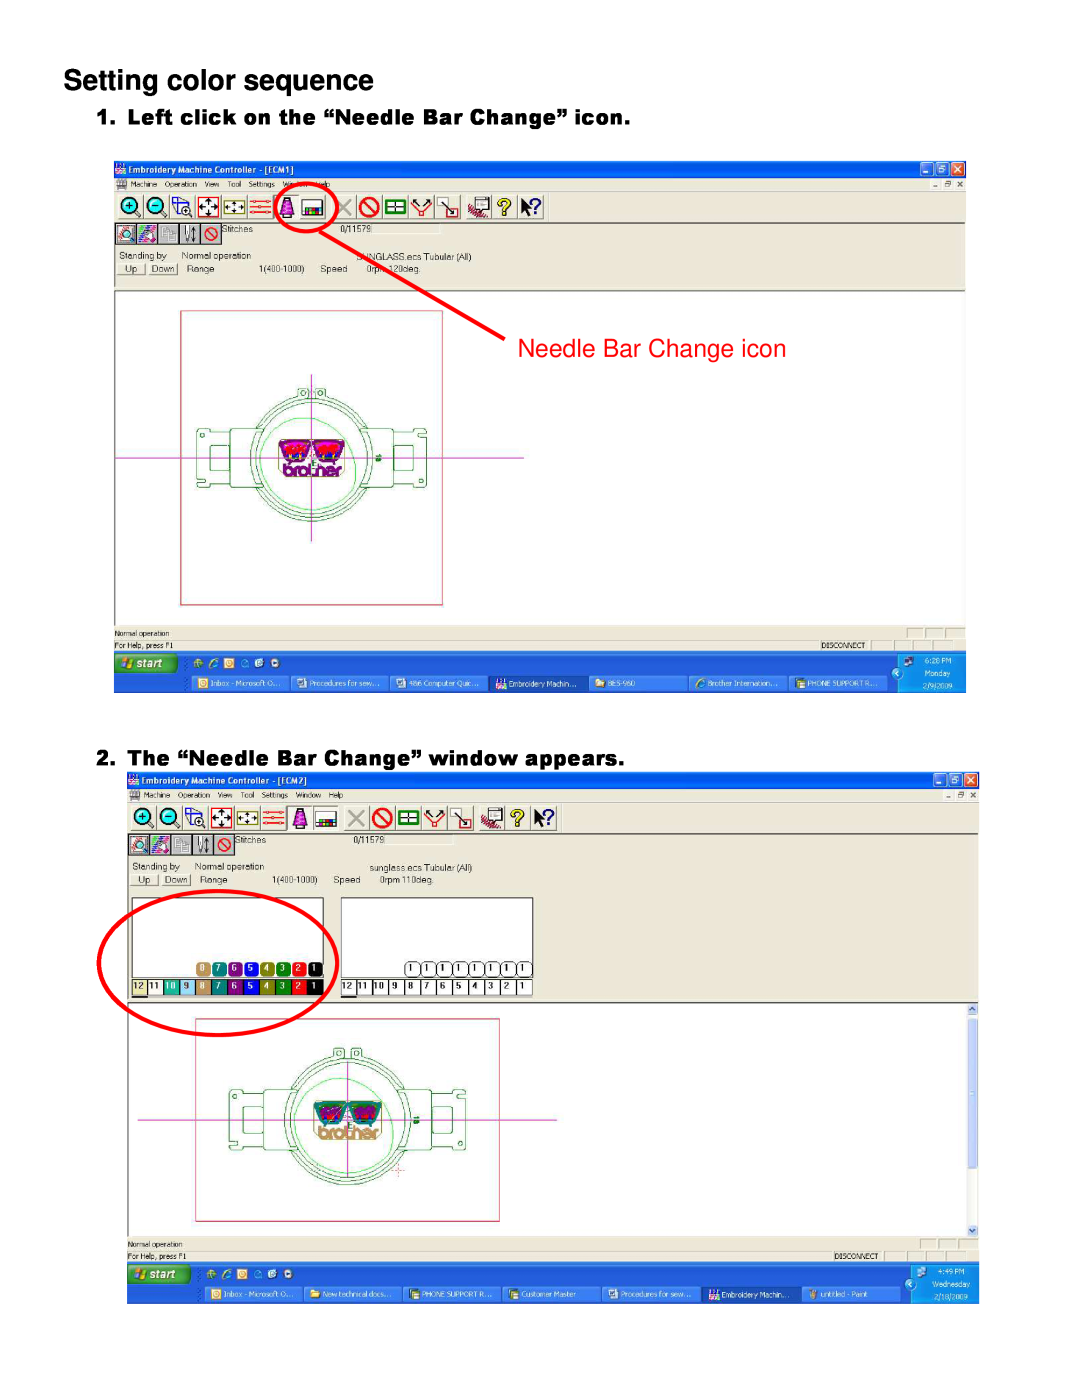 Brother BES-962, BE-1206-PC Setting color sequence, Needle Bar Change icon, Left click on the “Needle Bar Change” icon 